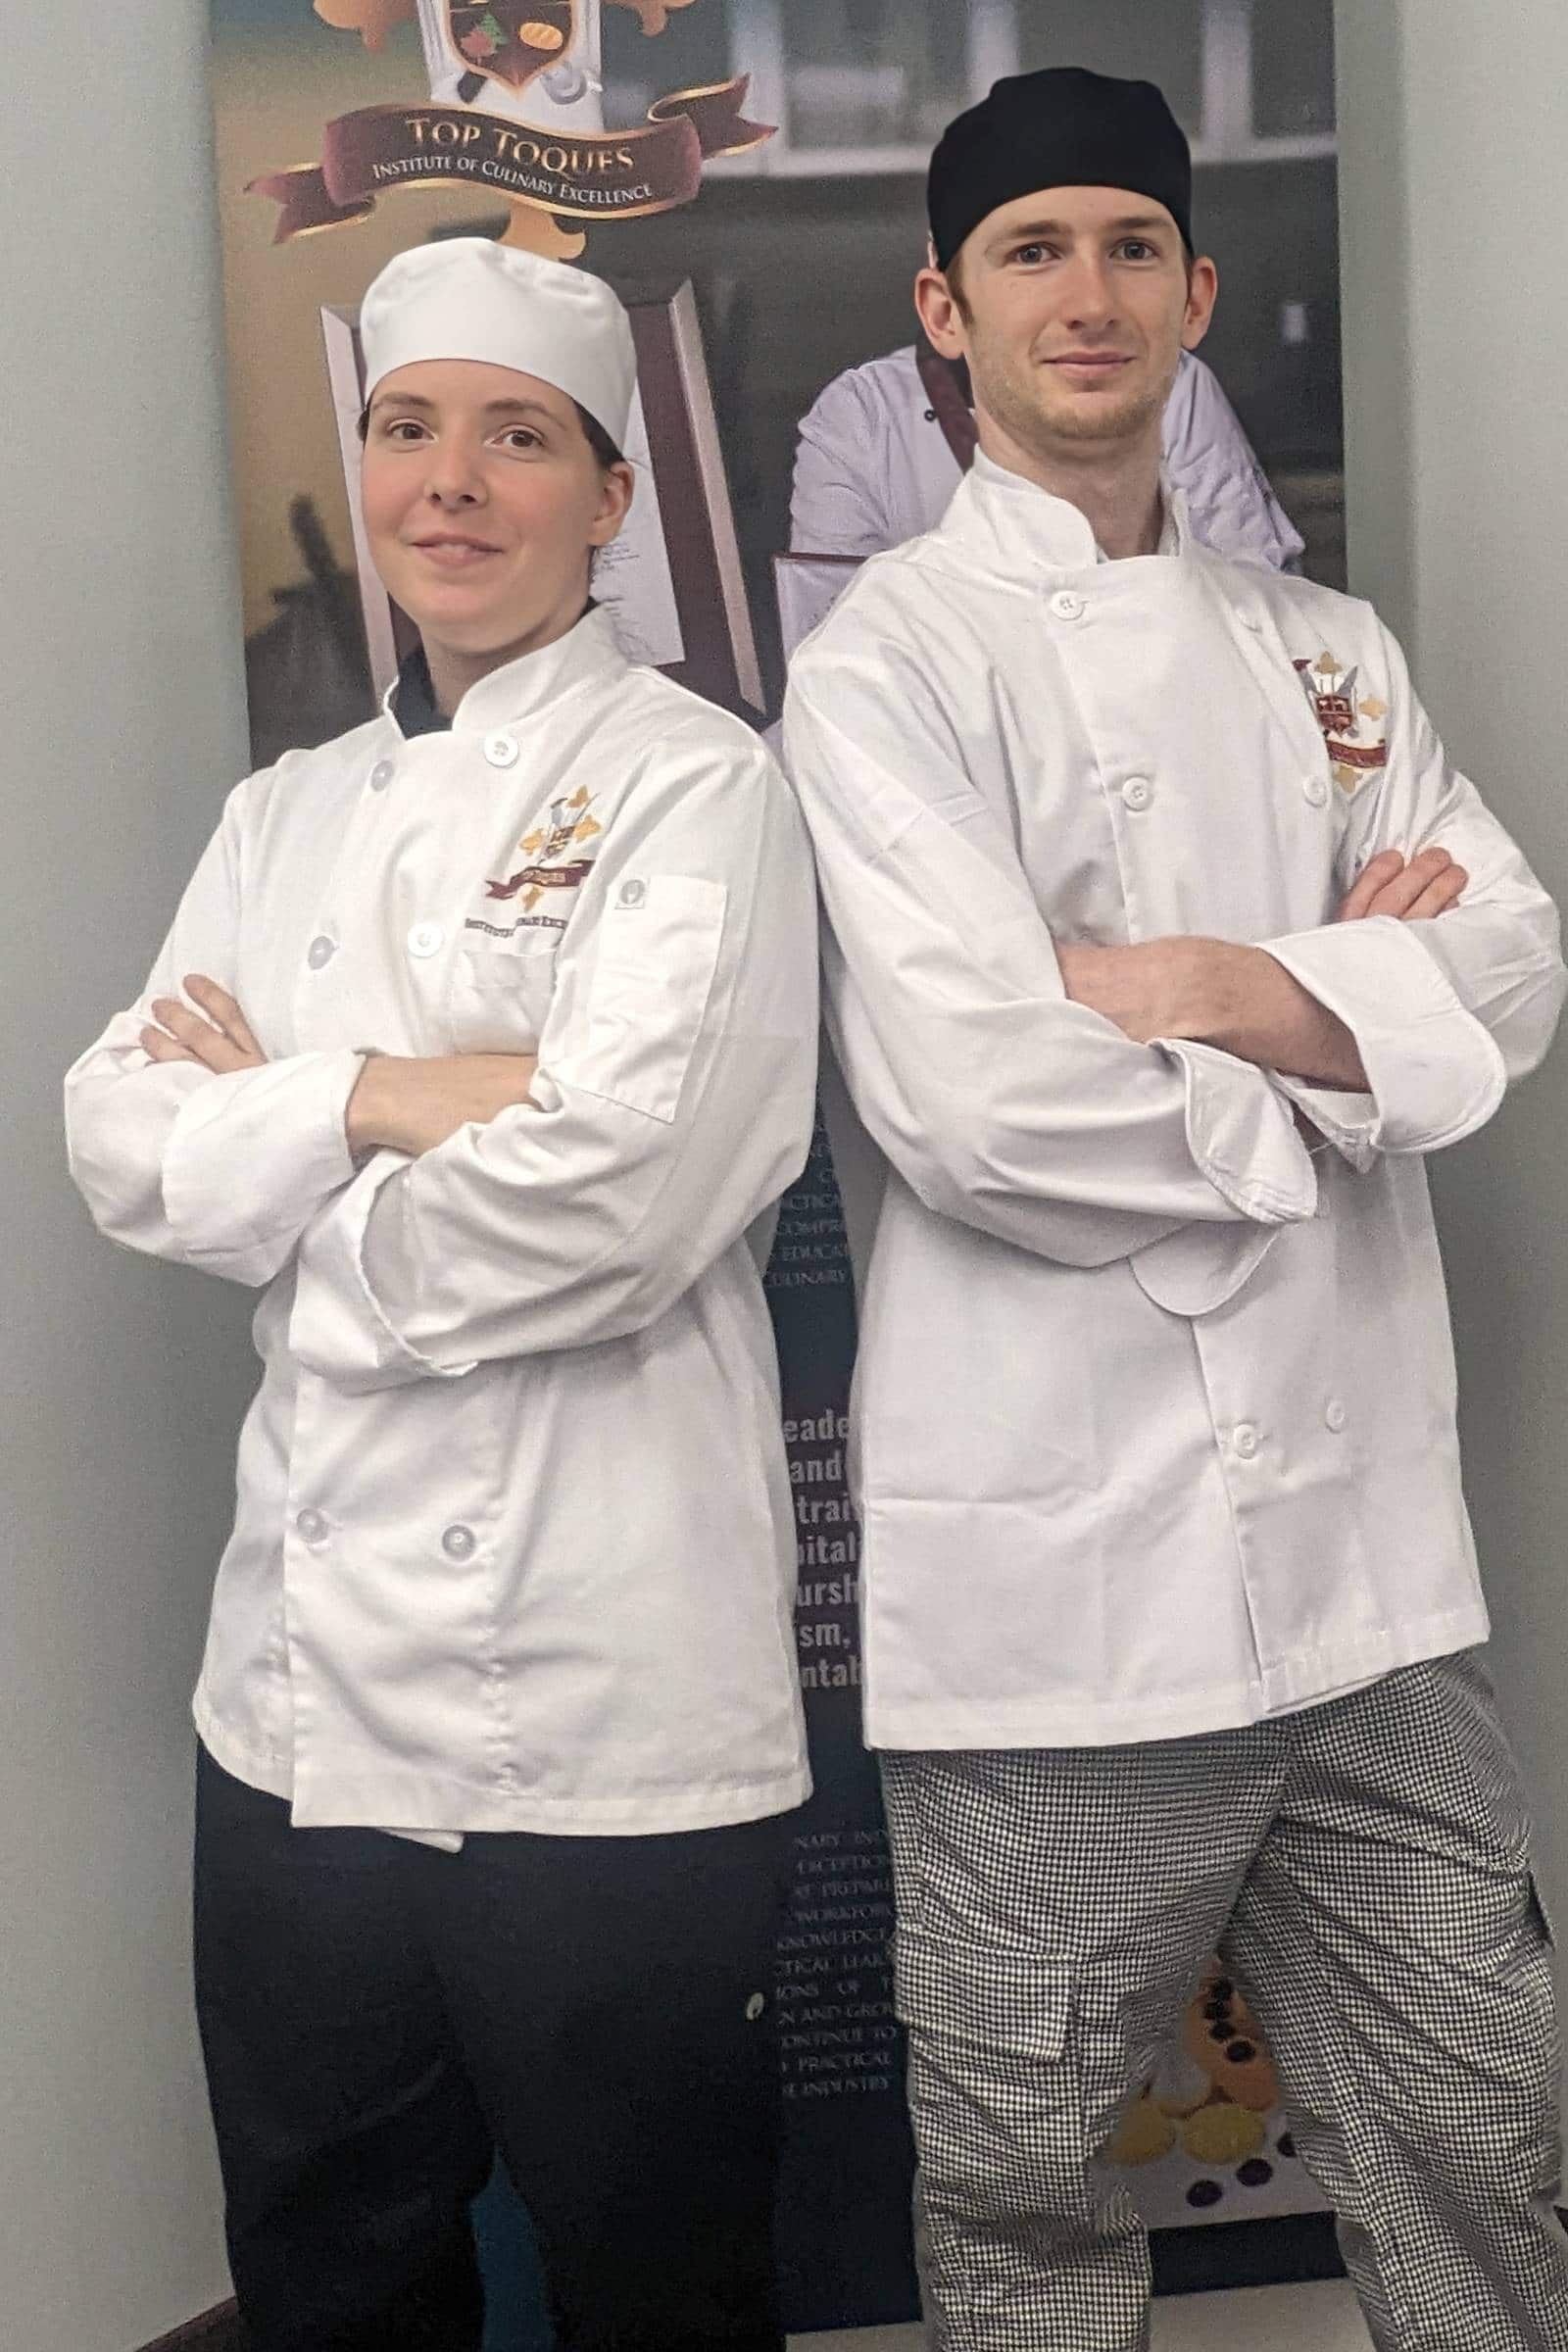 Taste Canada Cooks the Books - Image - Top Toques Institute of Culinary Excellence